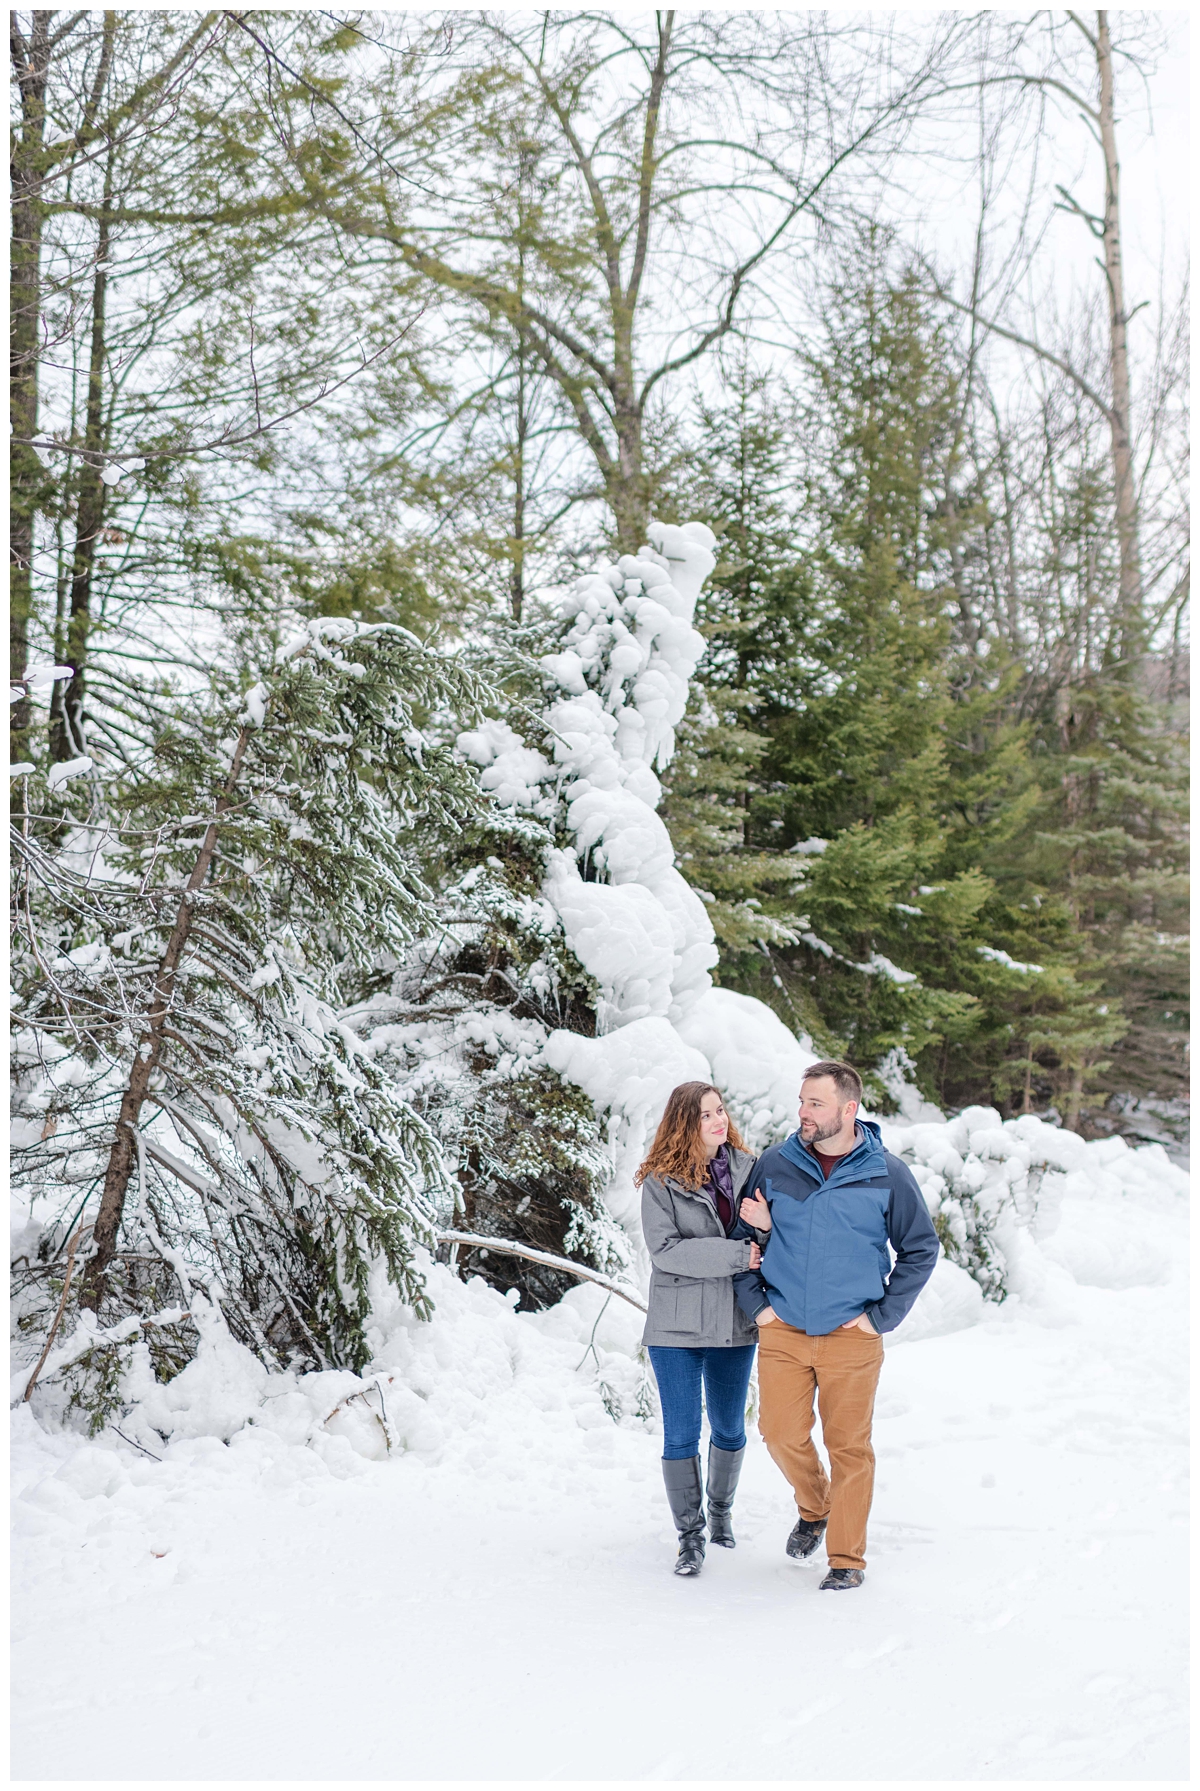 Winter Engagement Session in the snow